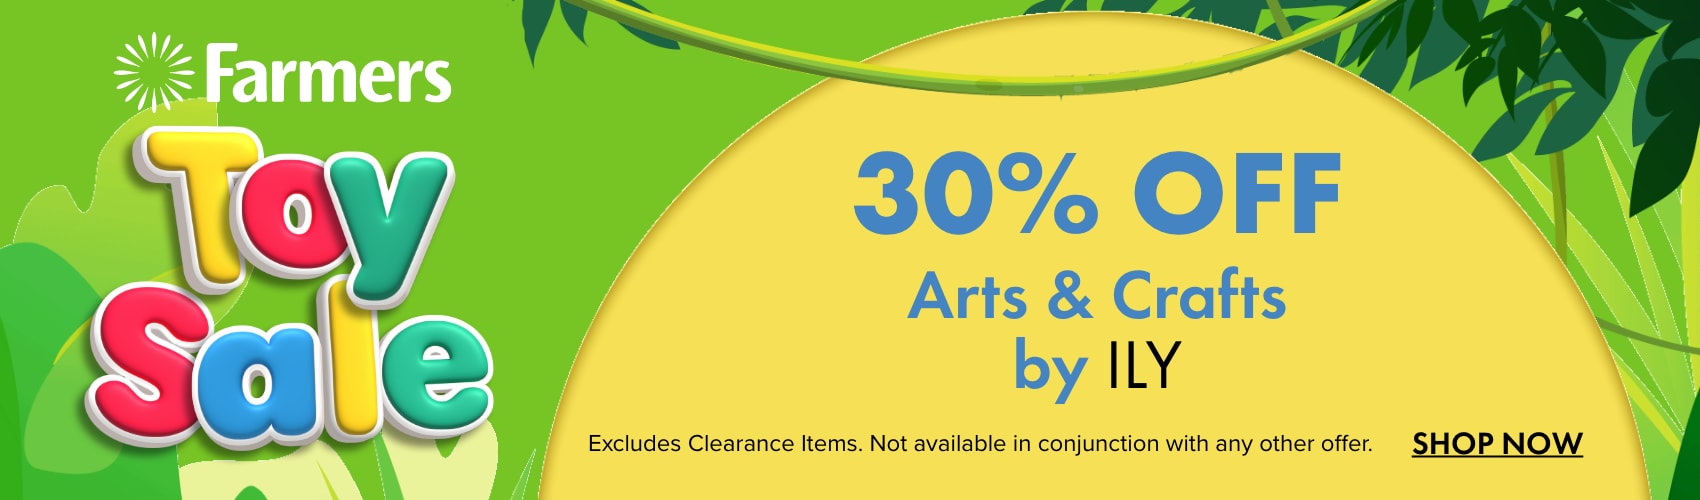 30% OFF Arts & Crafts by ILY